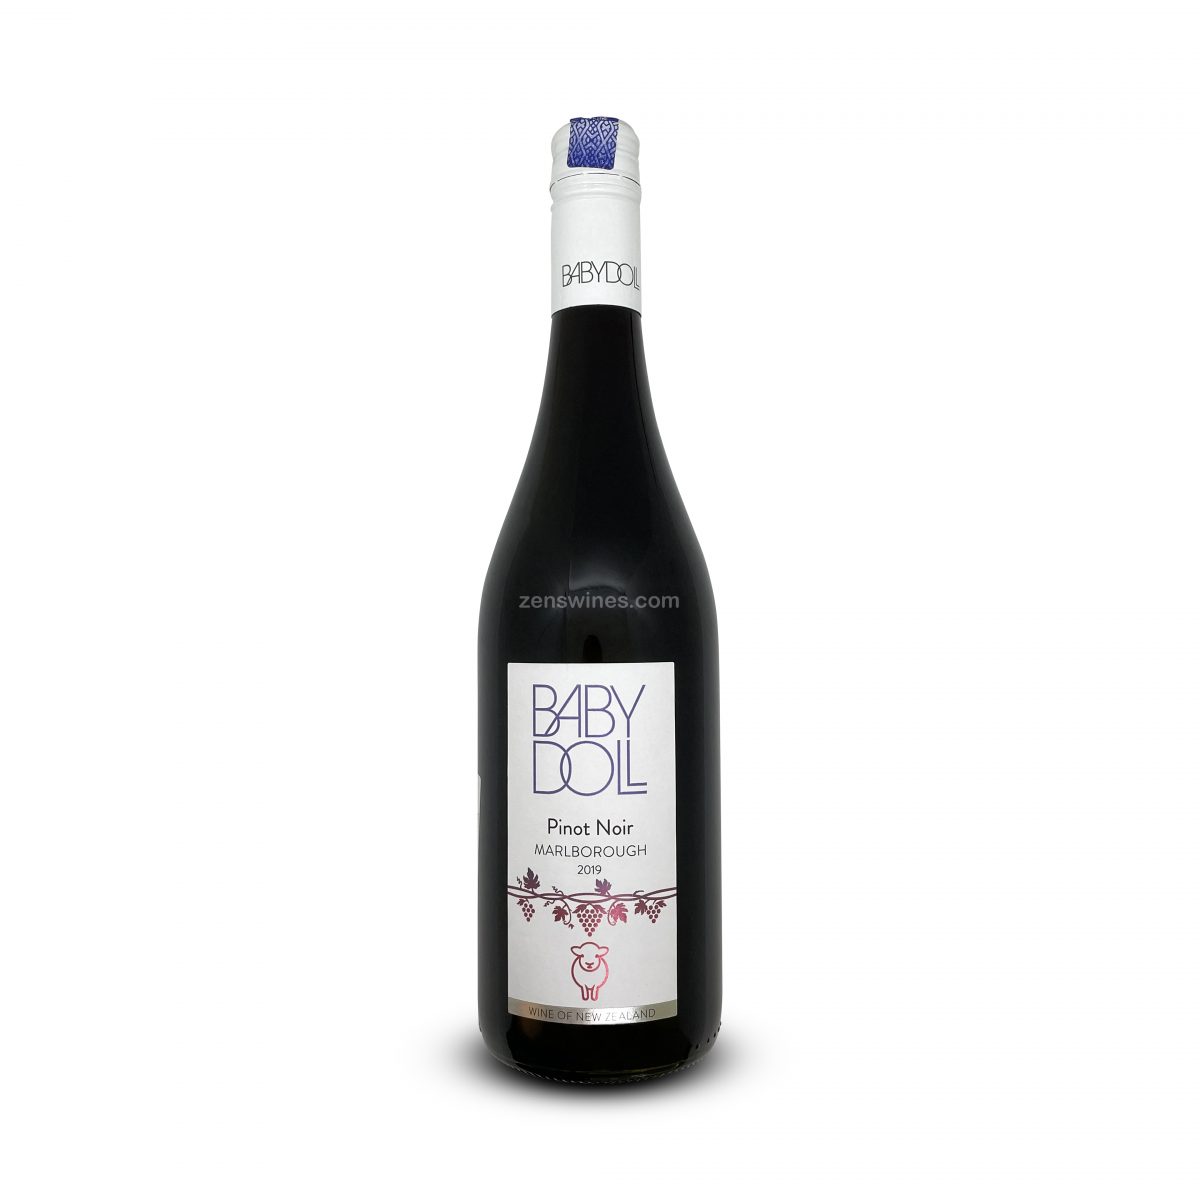 YEALAND_S BABY DOLL PINOT NOIR 2018 RM89